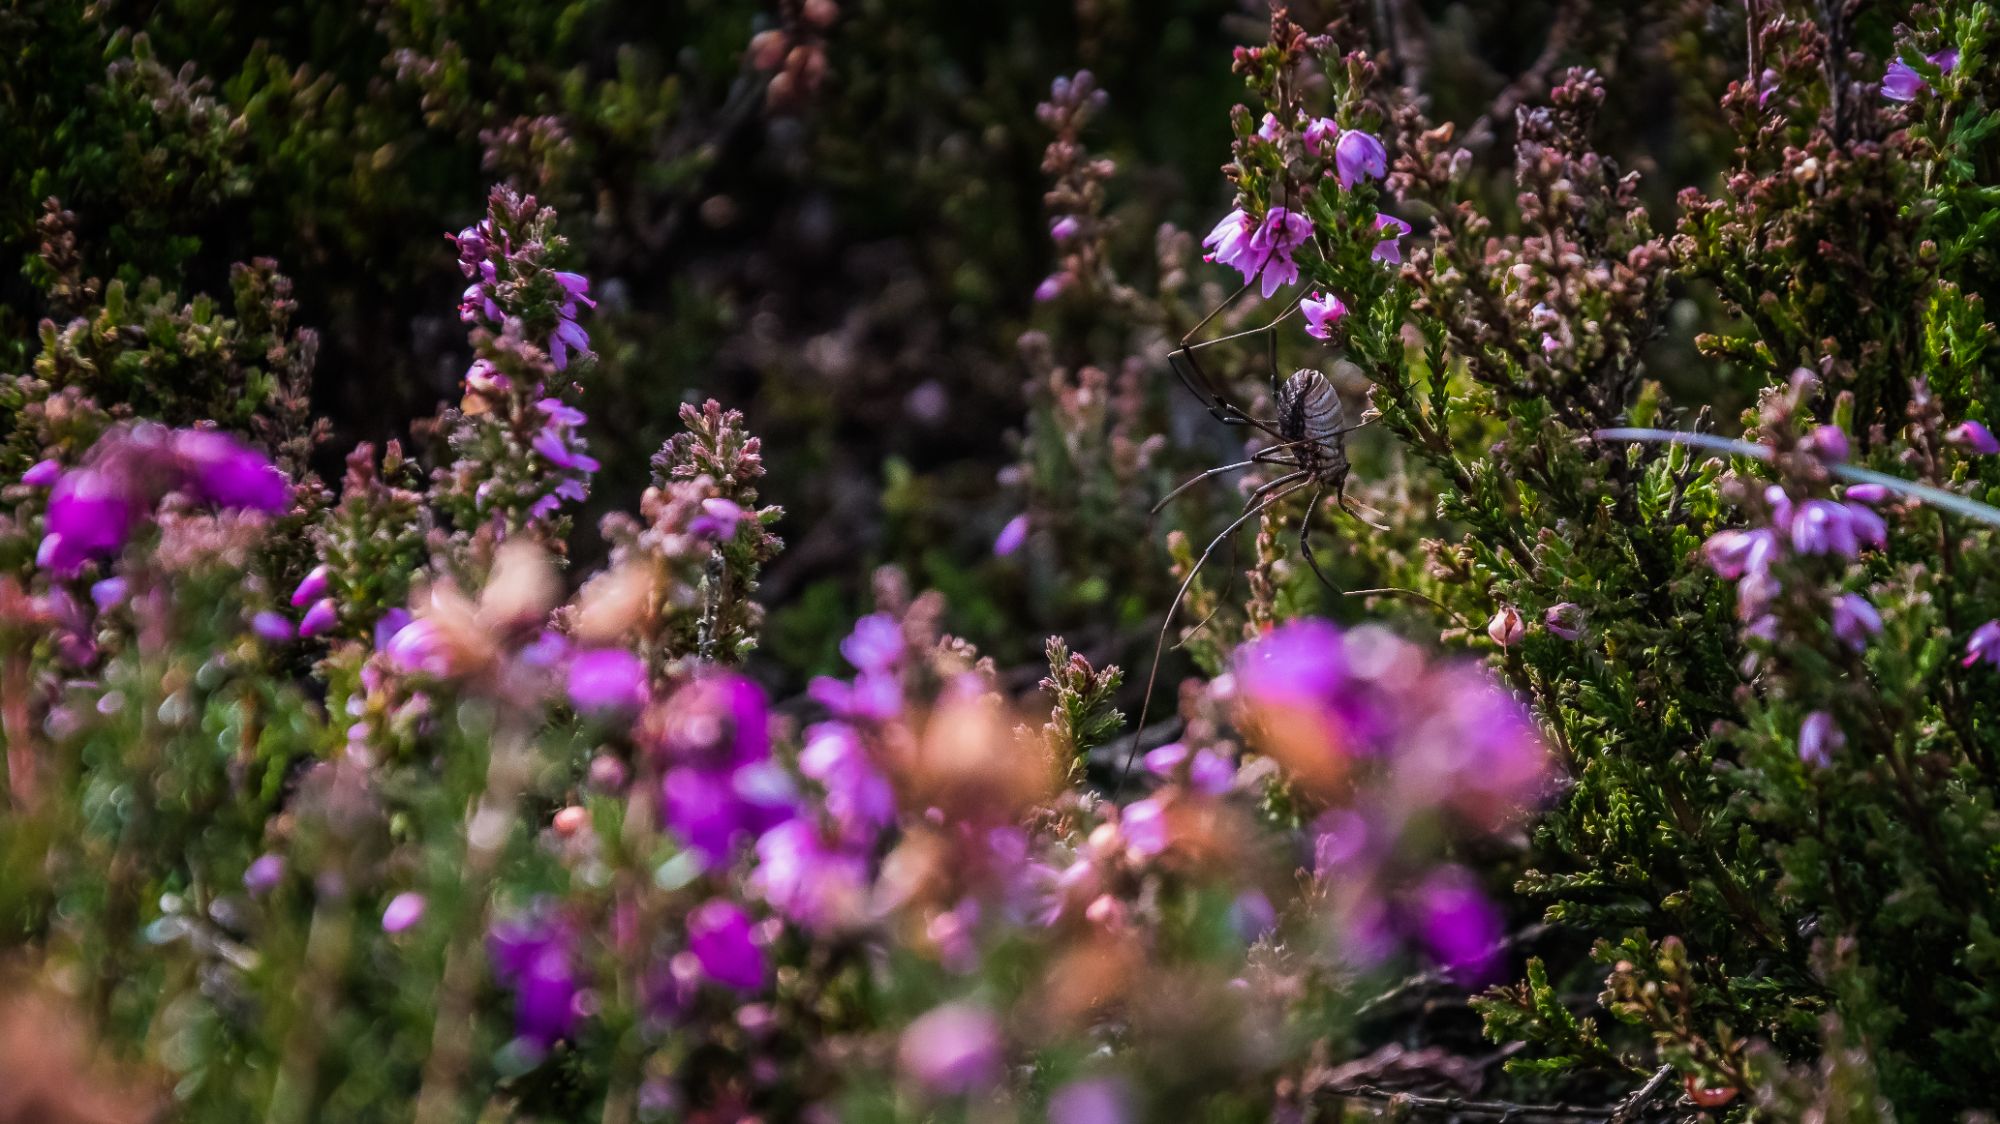 A spider slowly crawls through the purple heather. The image is taken from the spider's level so you can clearly see his long legs